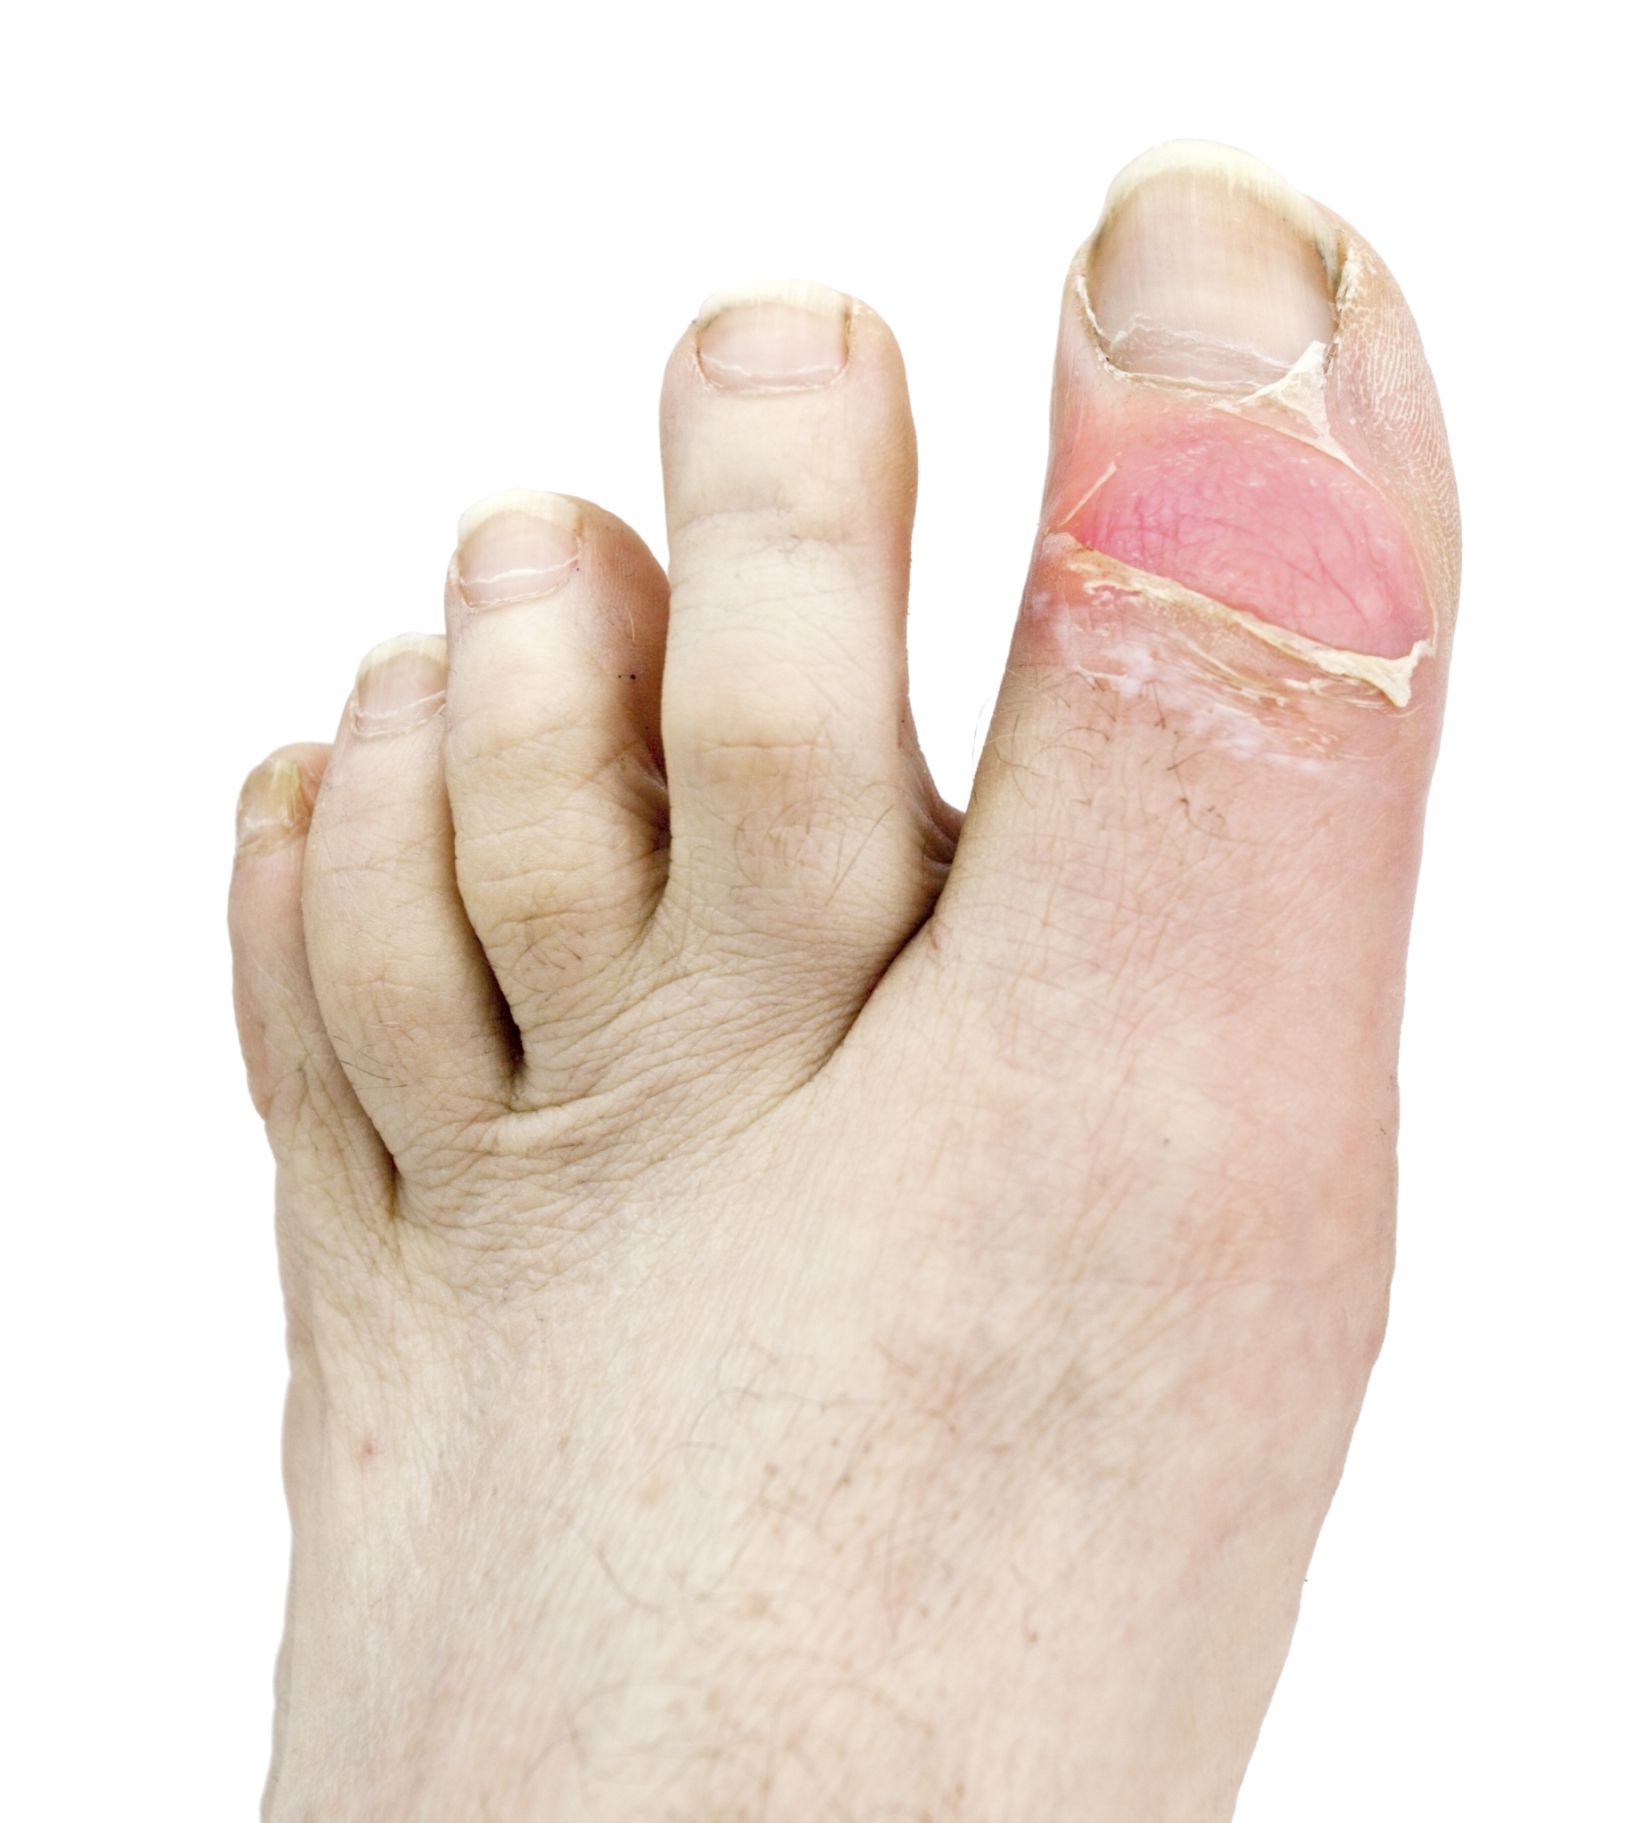 Gout: Signs, Symptoms, and Complications